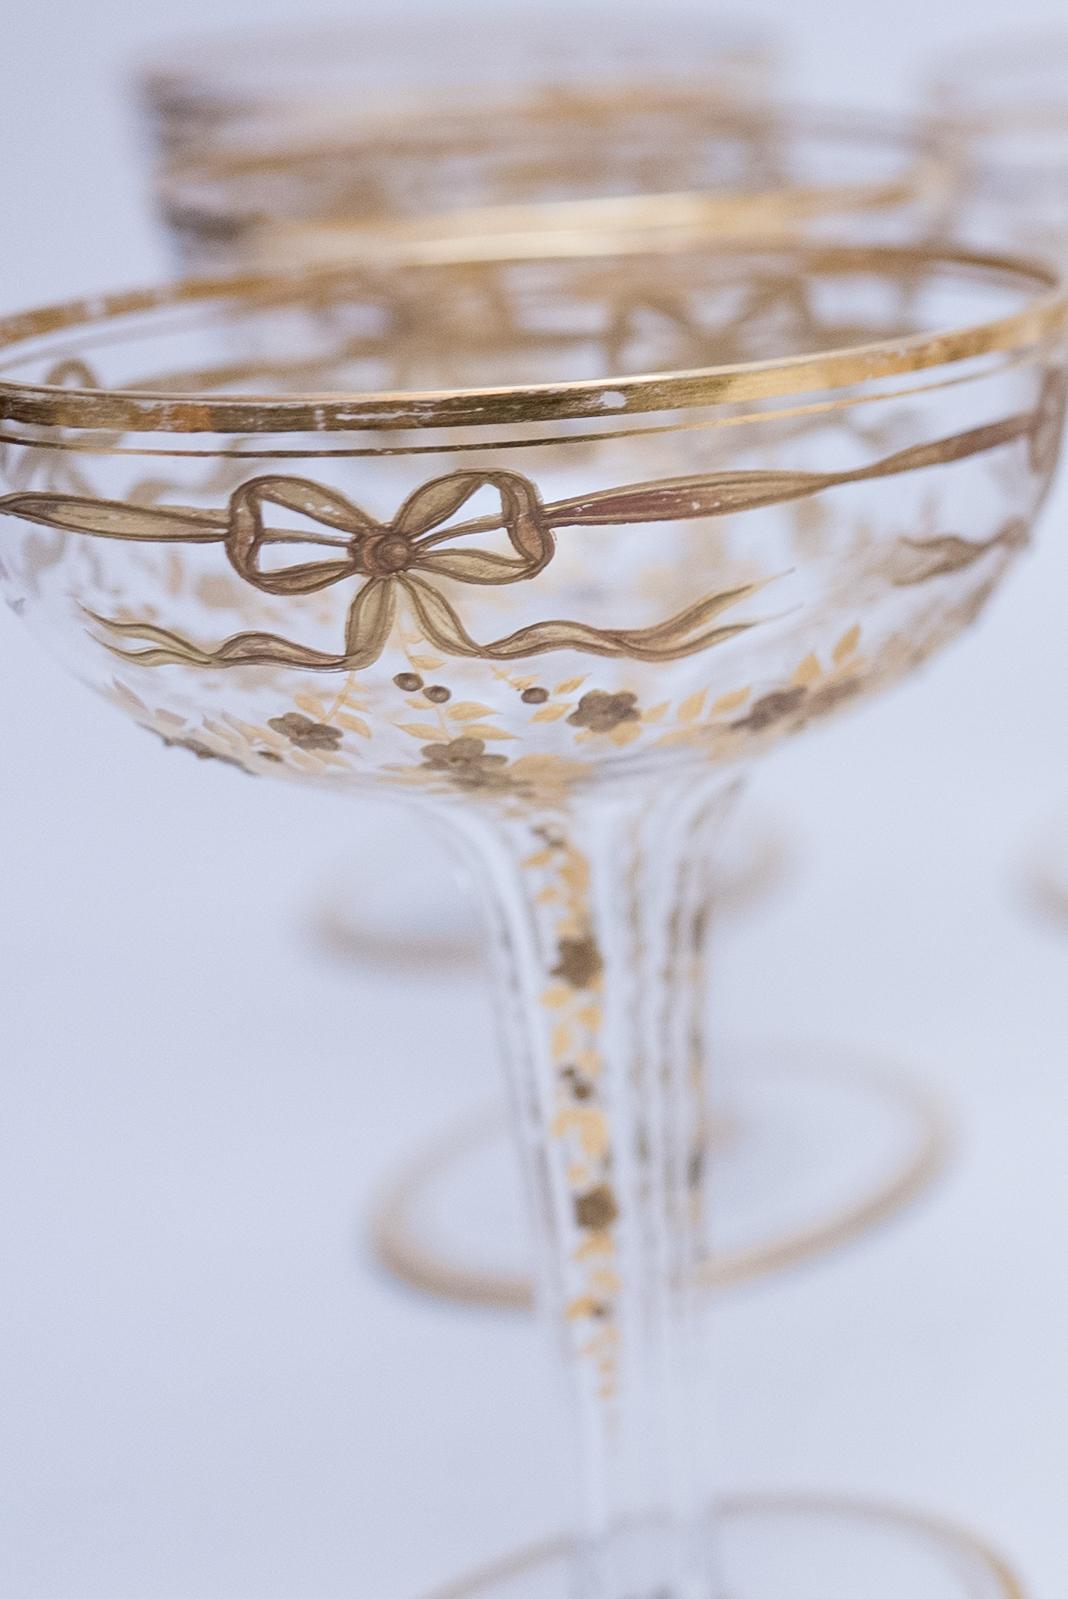 Hand-Crafted 12 Antique Hollow Stem Champagne Coupes, Raised Gilding Throughout, Cut Stem